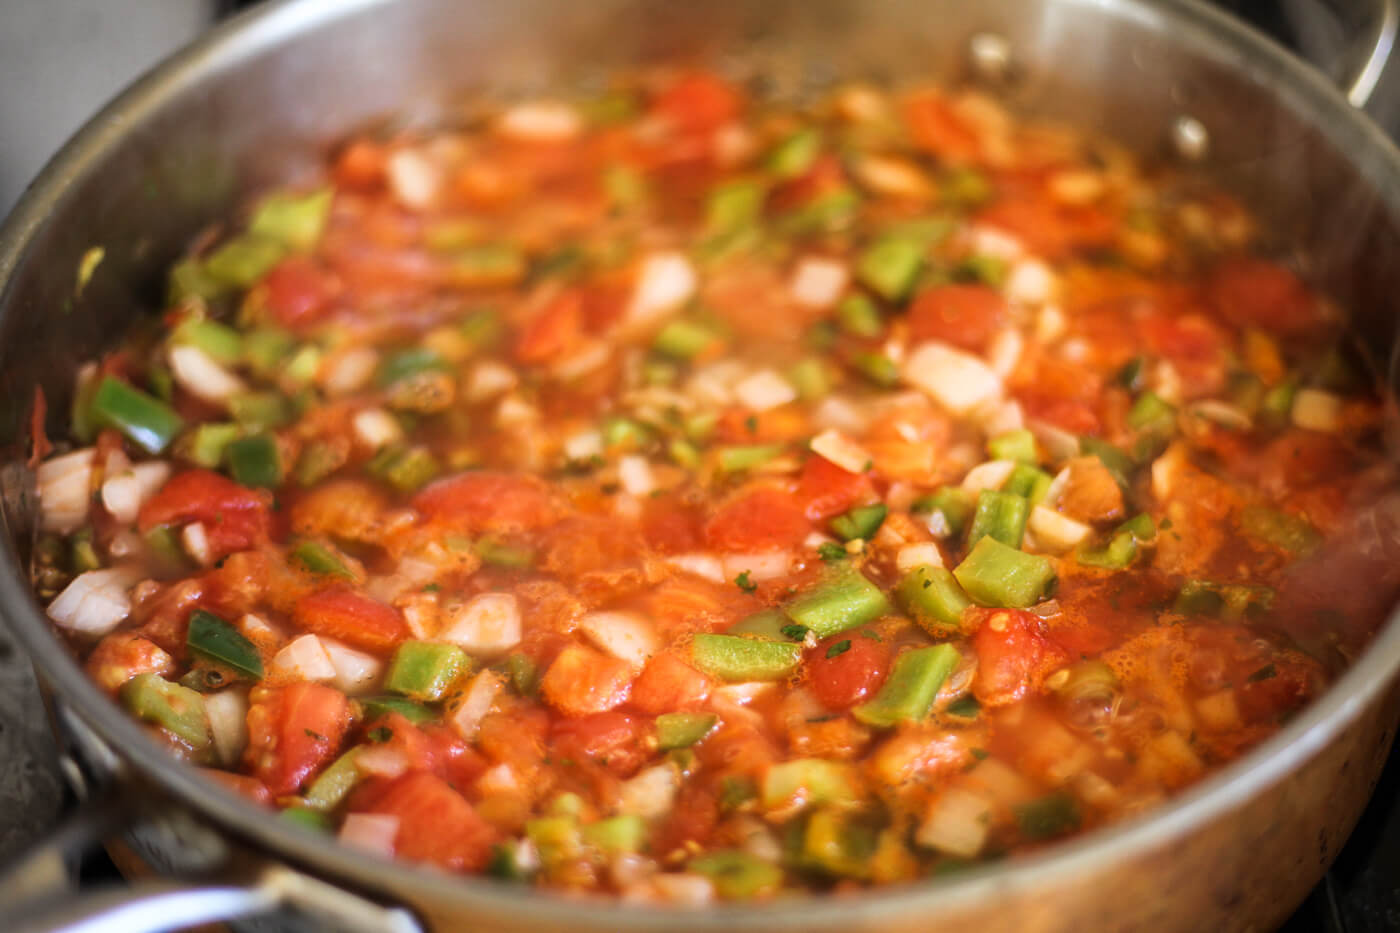 A salsa recipe for canning simmers on the stove.